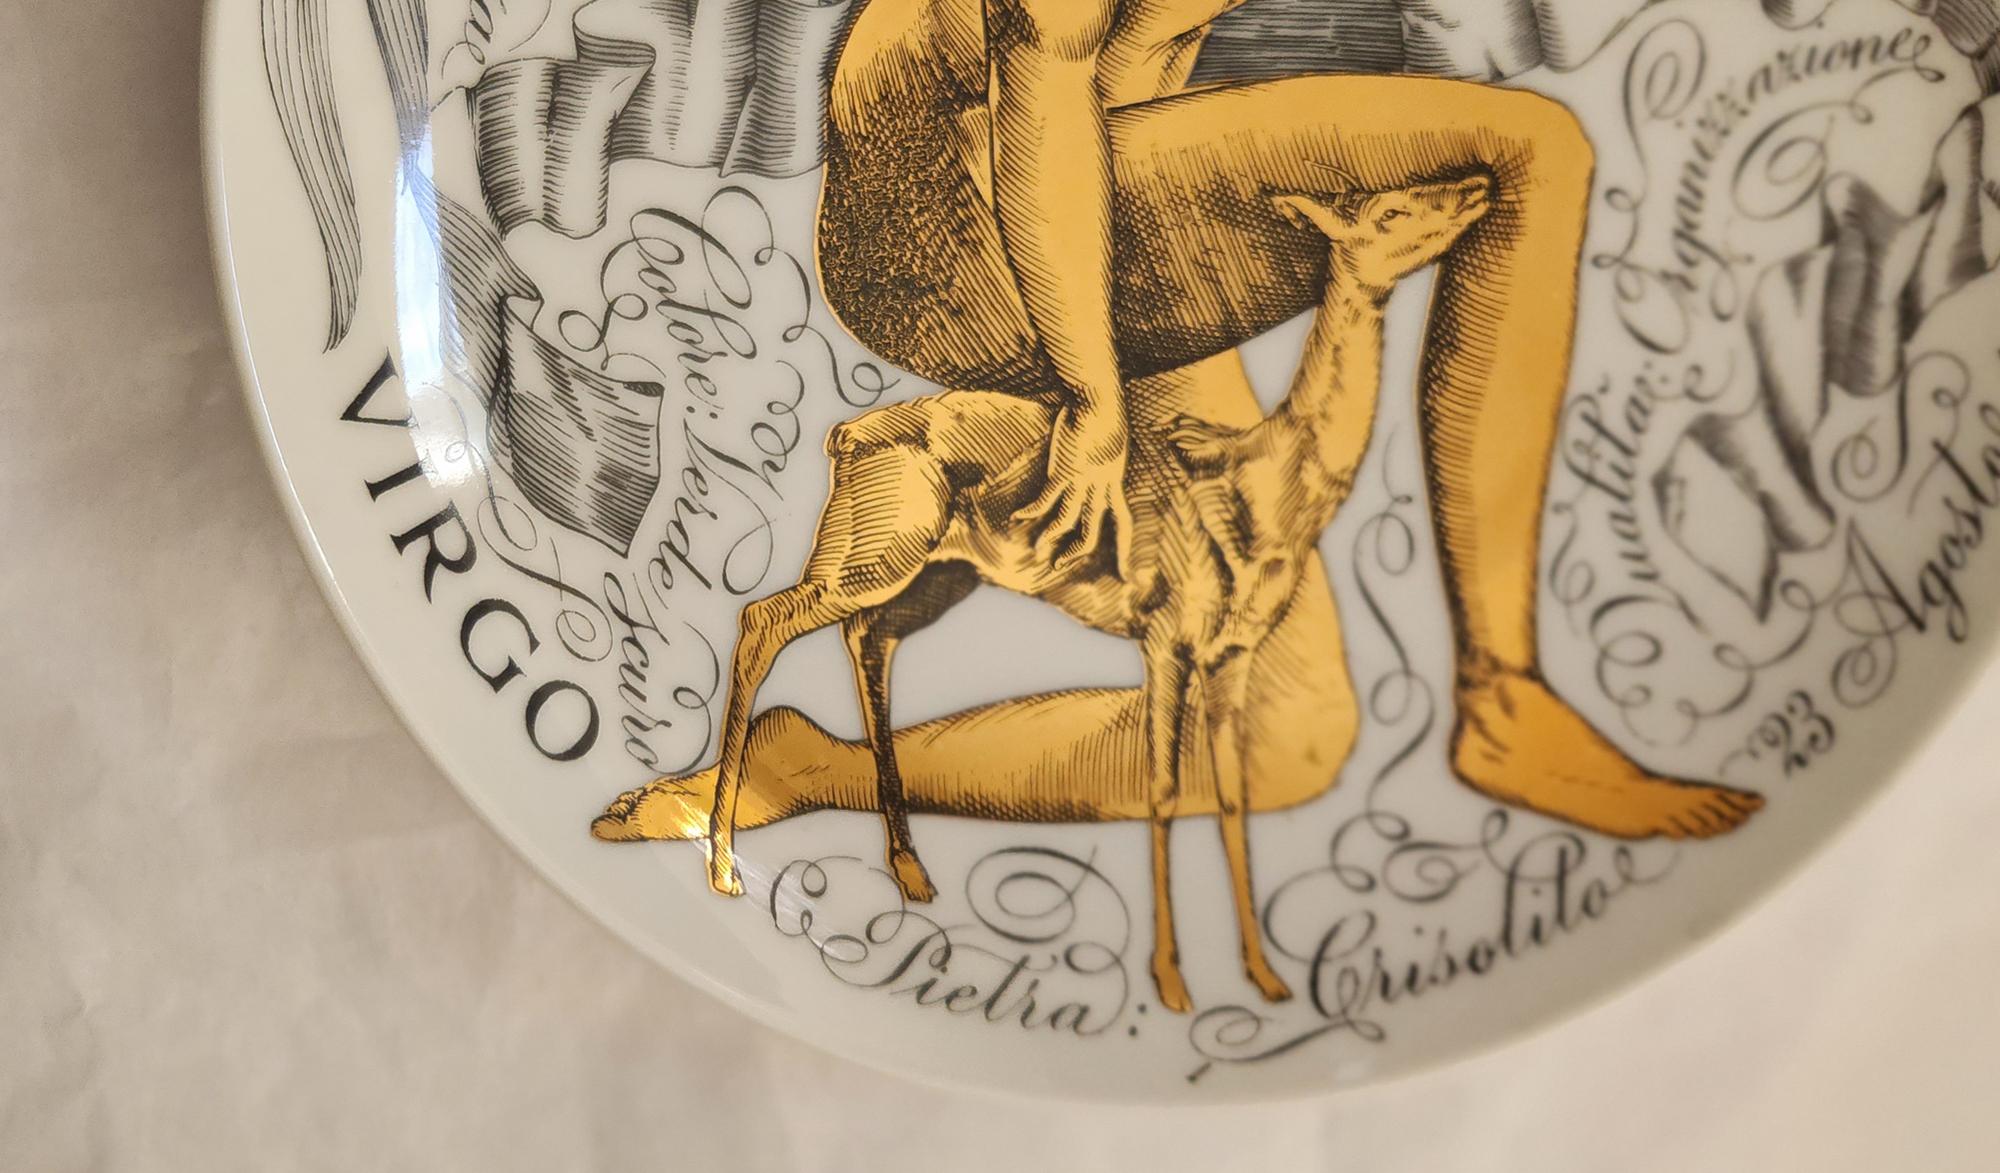 1969 Piero Fornasetti Zodiac Porcelain Plate, Virgo, Made for Corisia In Good Condition For Sale In Downingtown, PA